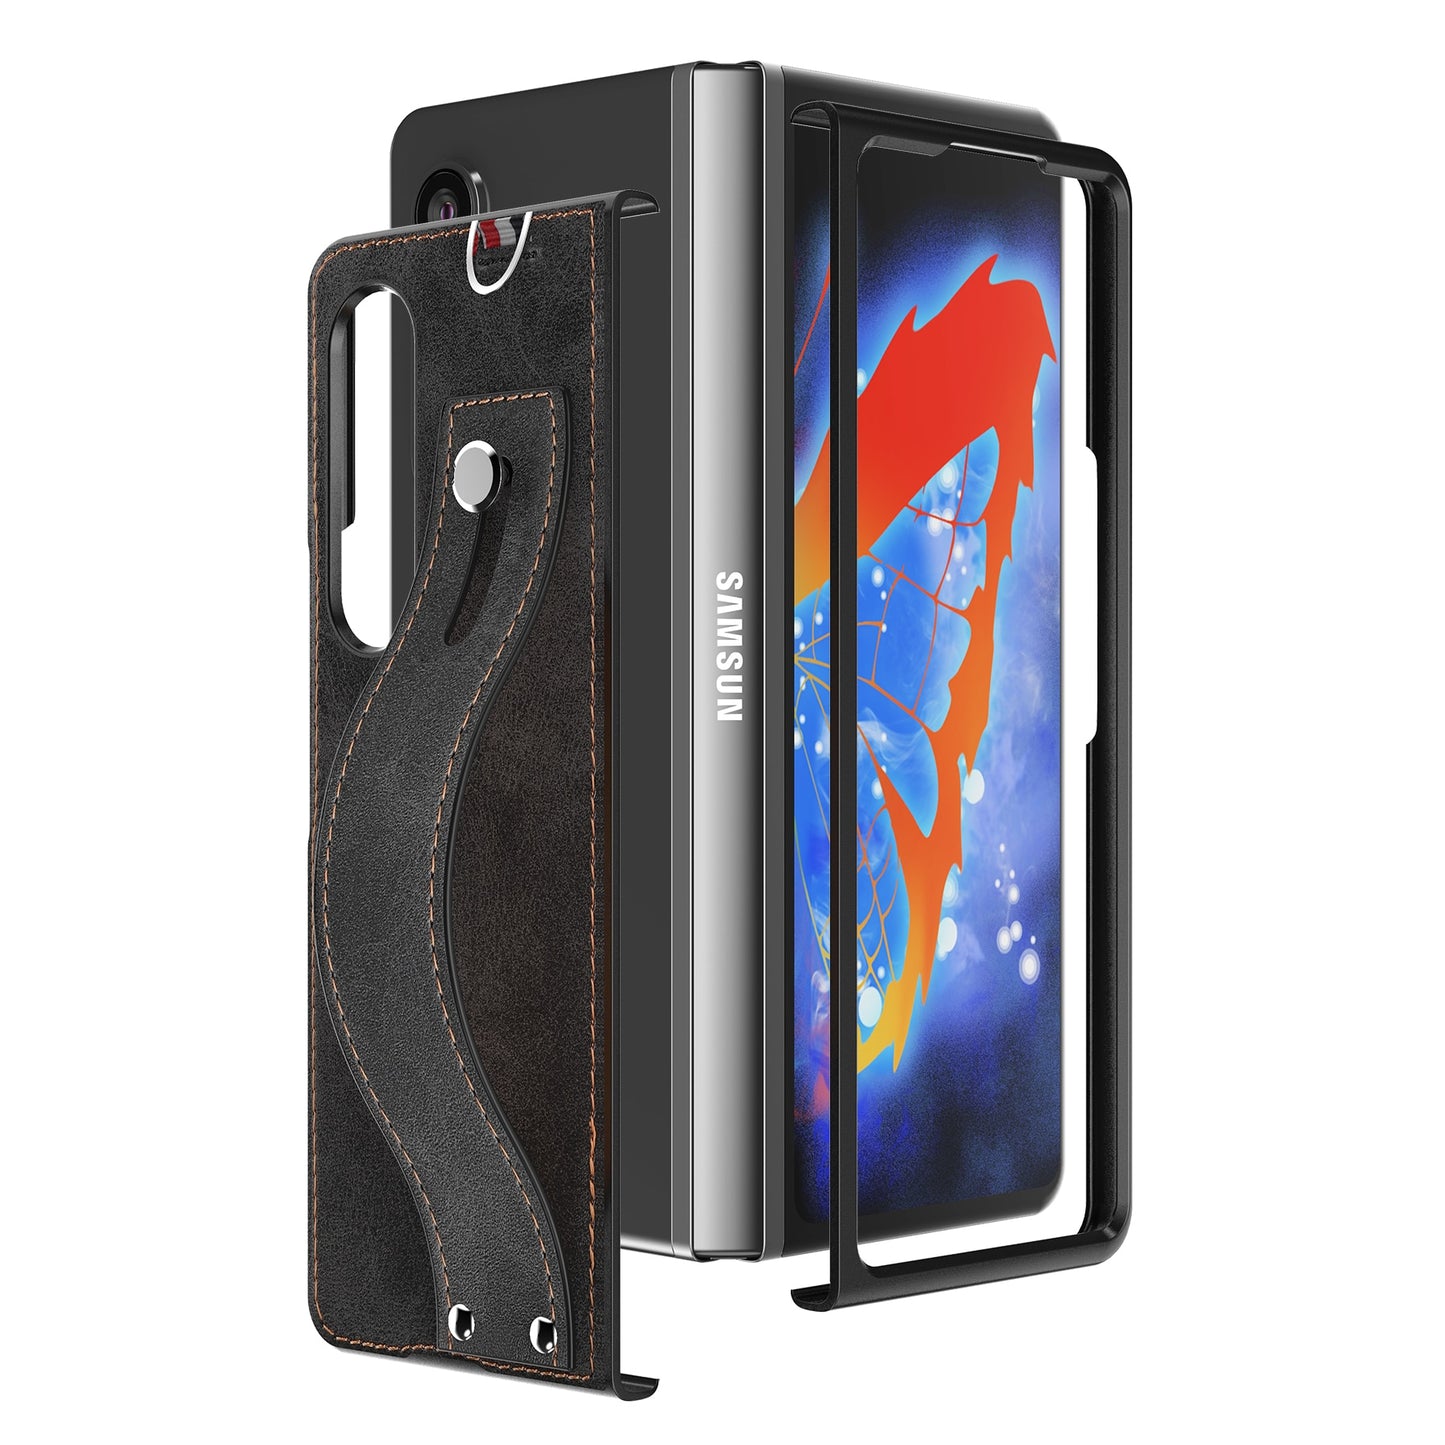 Samsung Galaxy Z Fold 3 5G Case Slim Lightweight Genuine Leather Hand Strap Protective Shockproof Cover